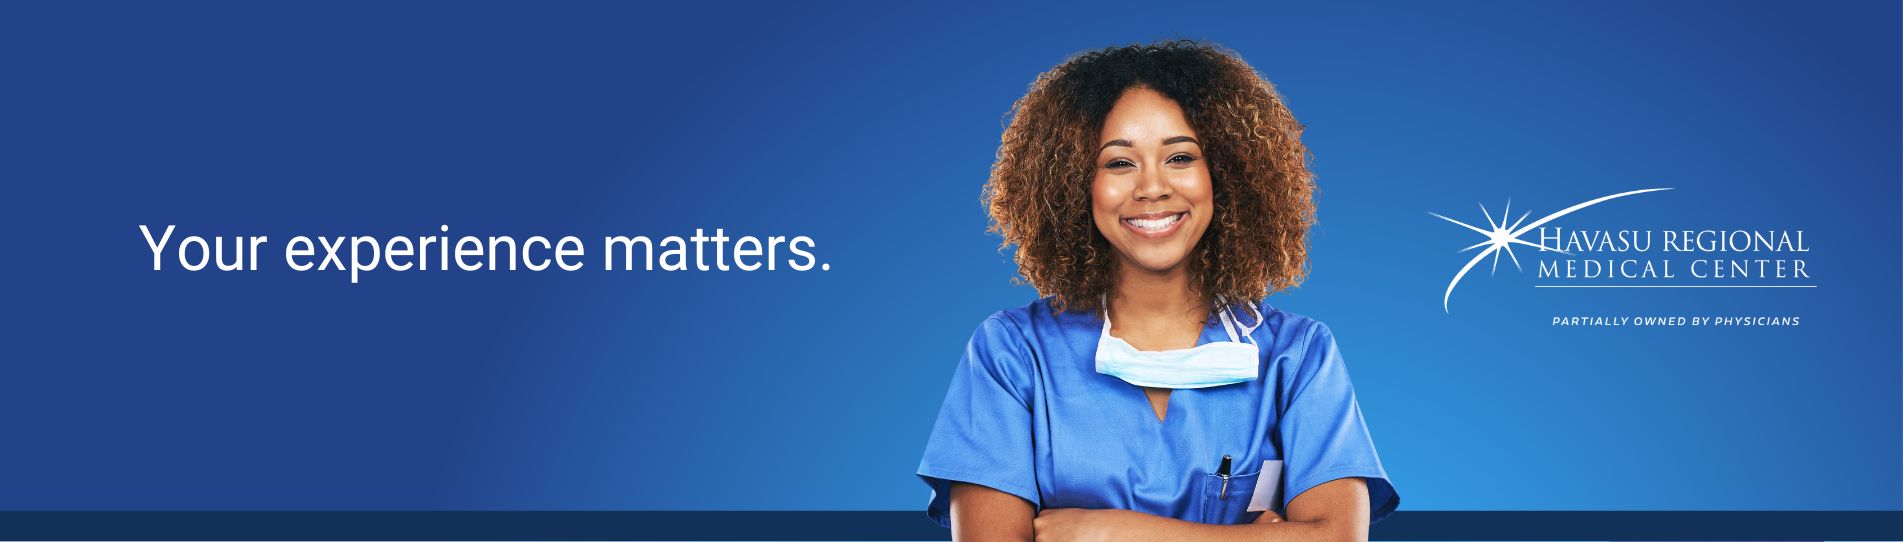 Banner graphic with image of nurse and text "your experience matters."